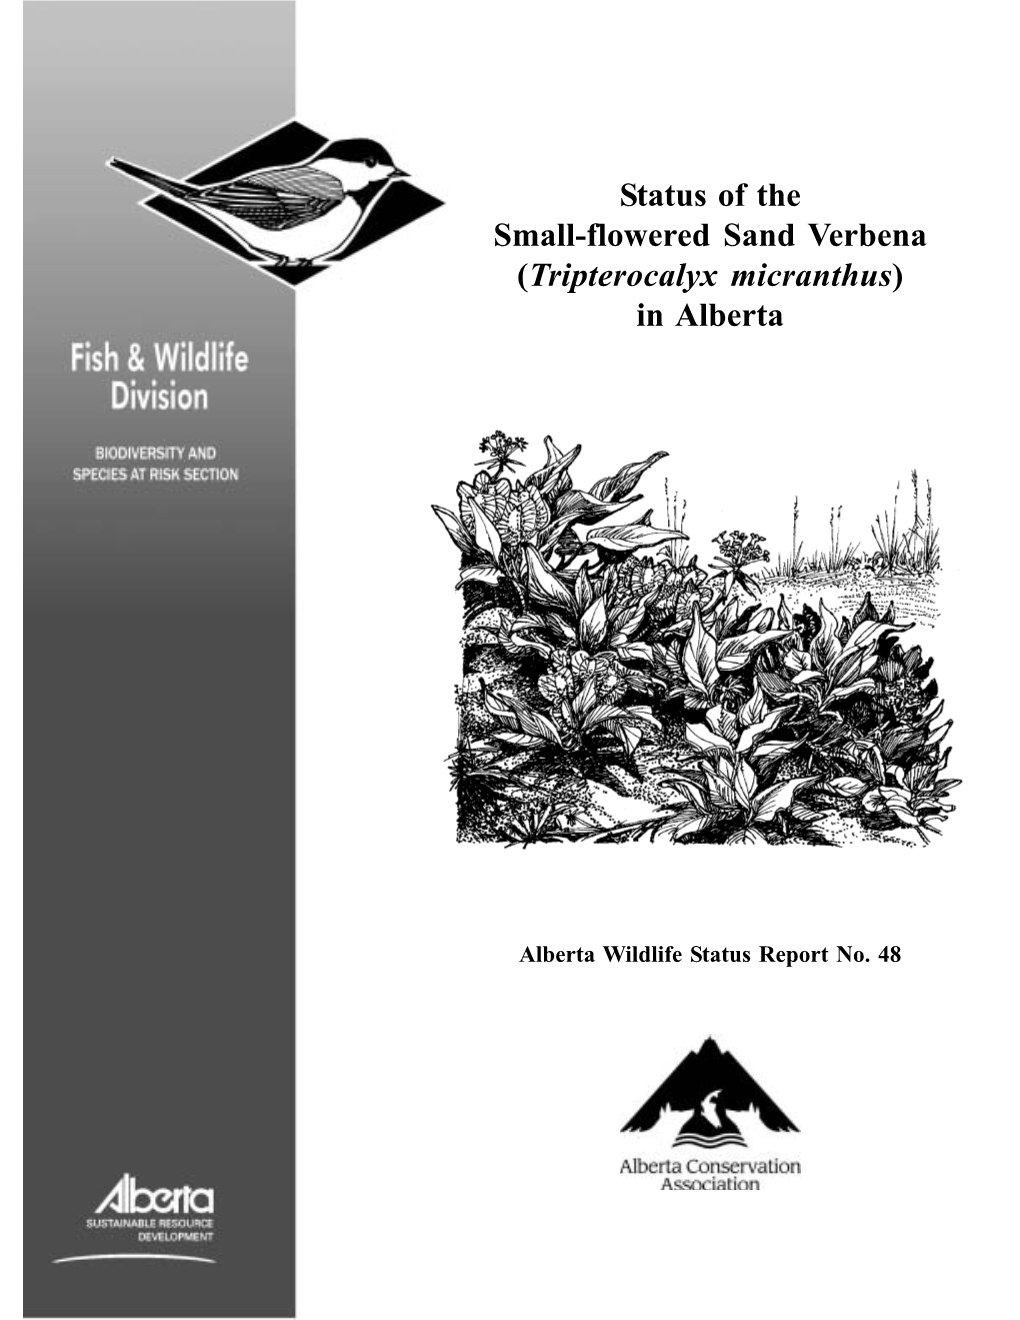 Status of the Small-Flowered Sand Verbena (Tripterocalyx Micranthus) in Alberta